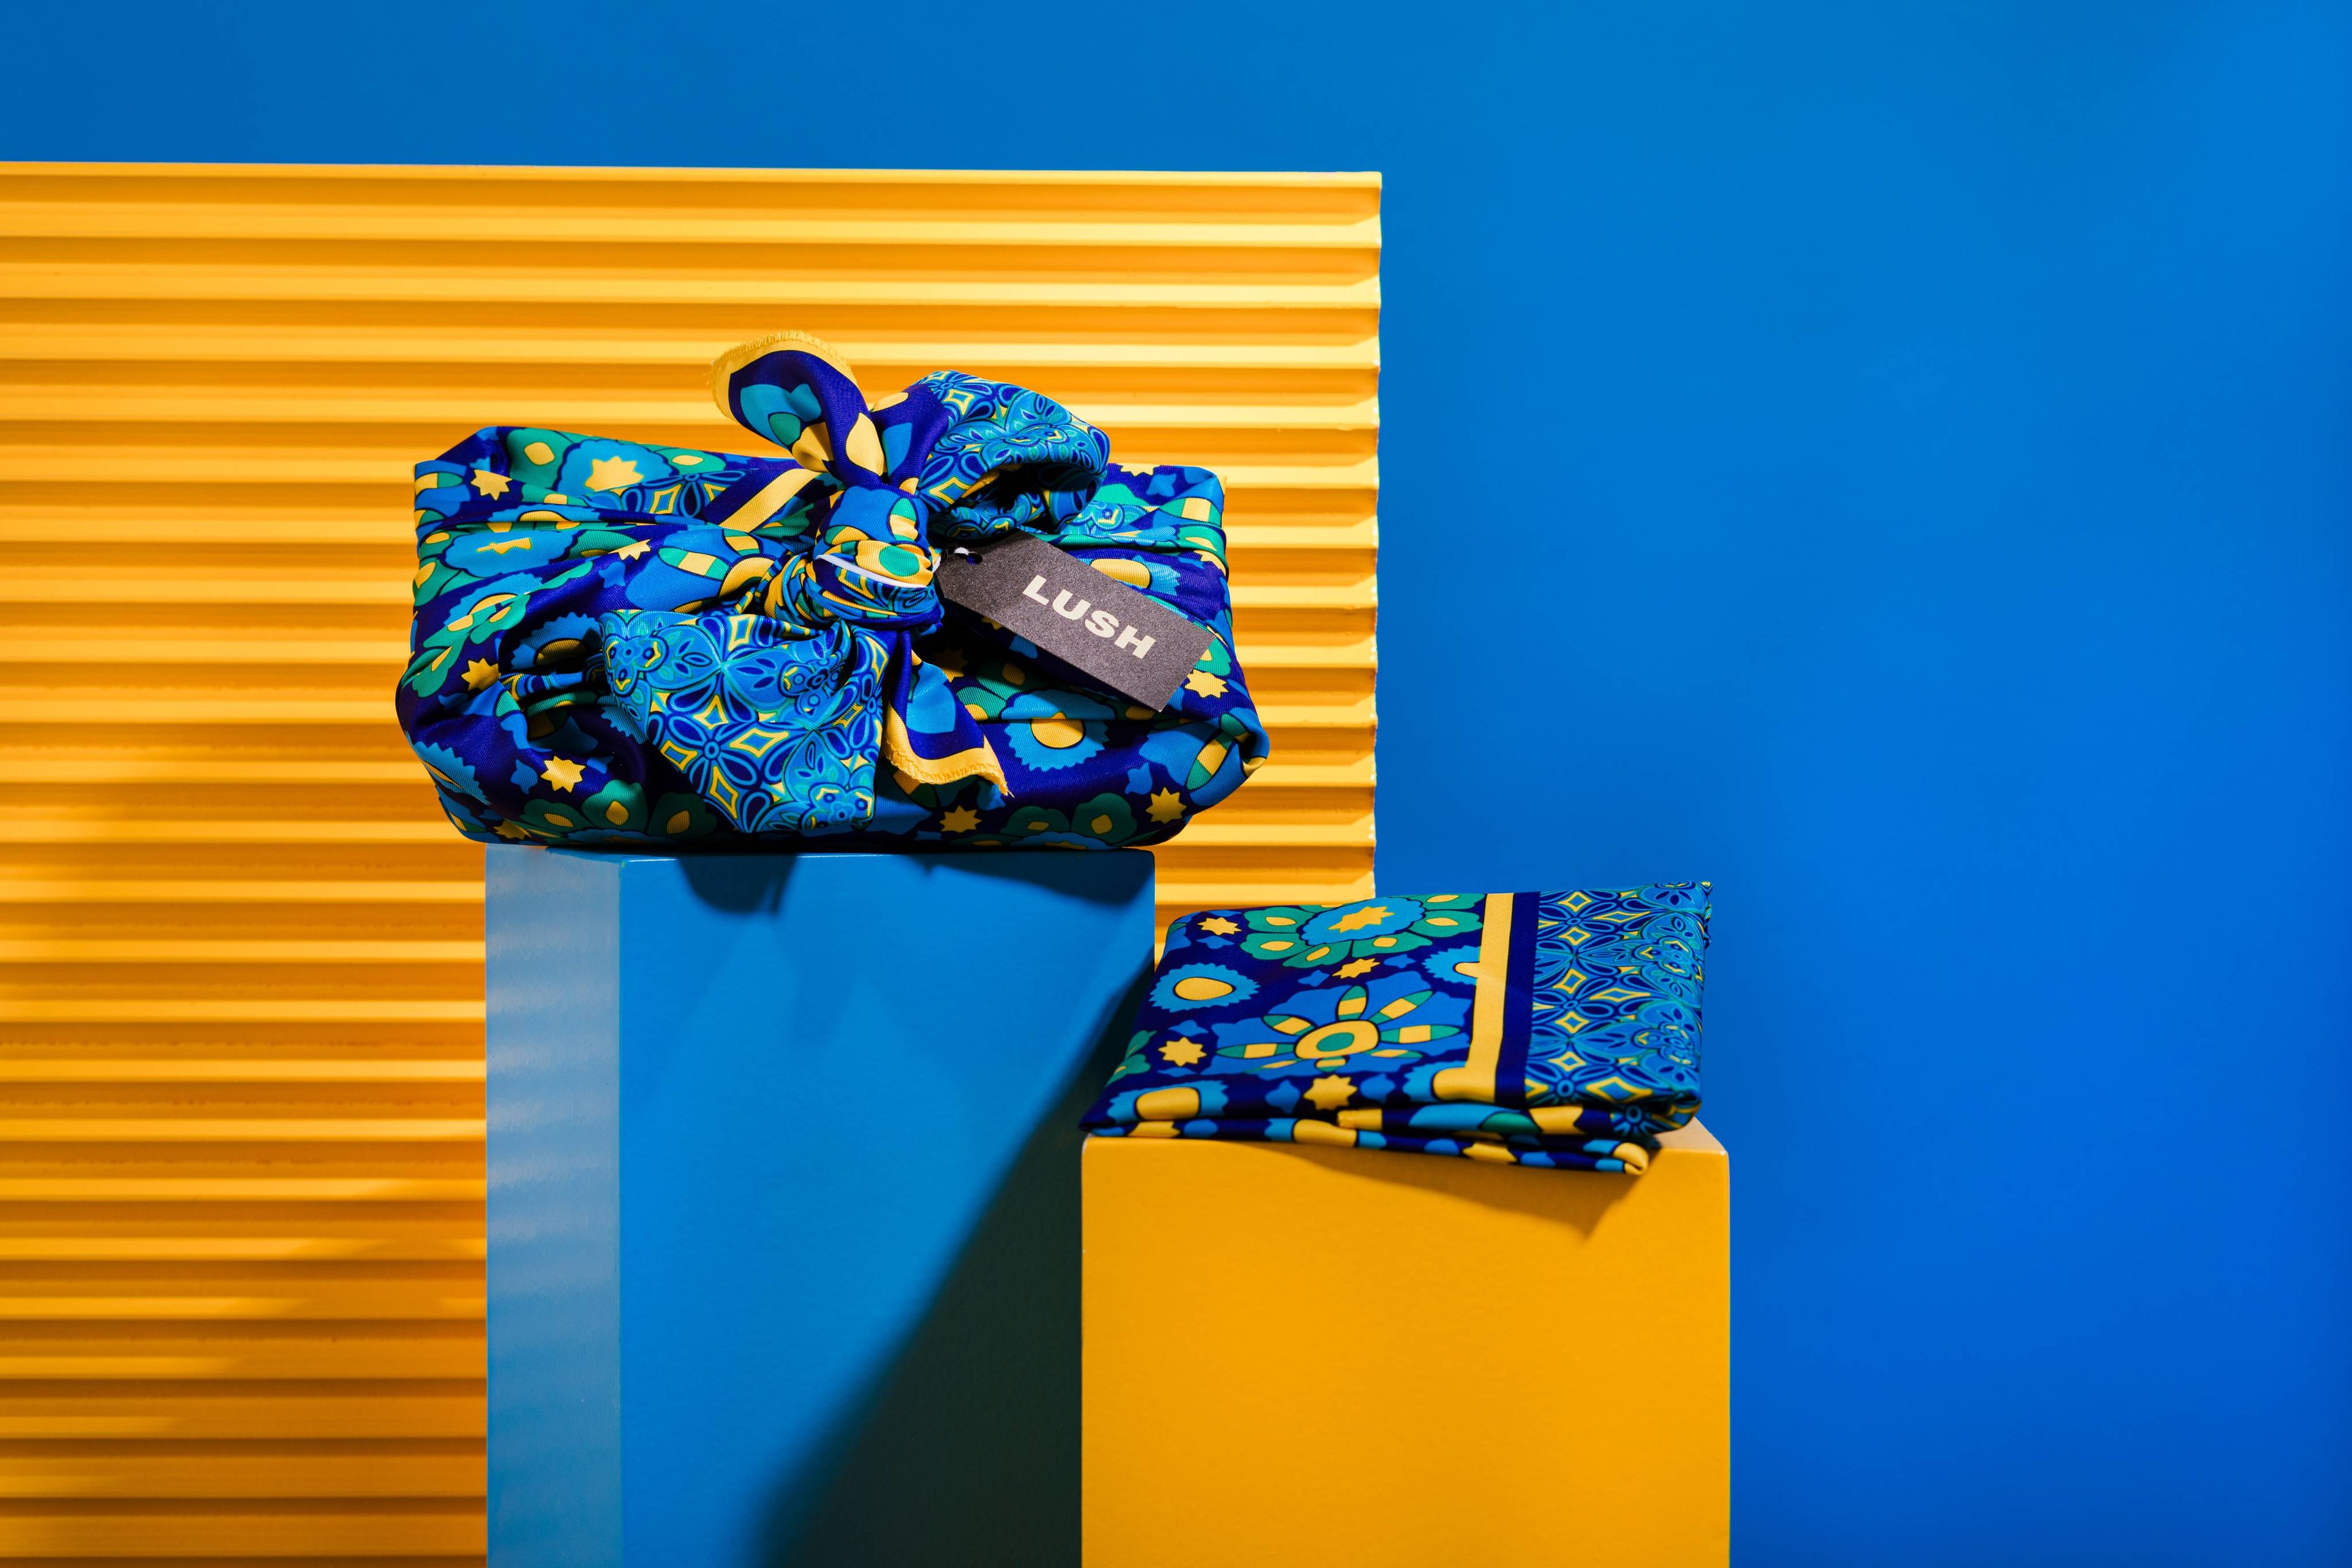 The Knot Wrap is decoratively wrapped with a Lush gift tag, alongside one folded, in front of a blue and yellow background.